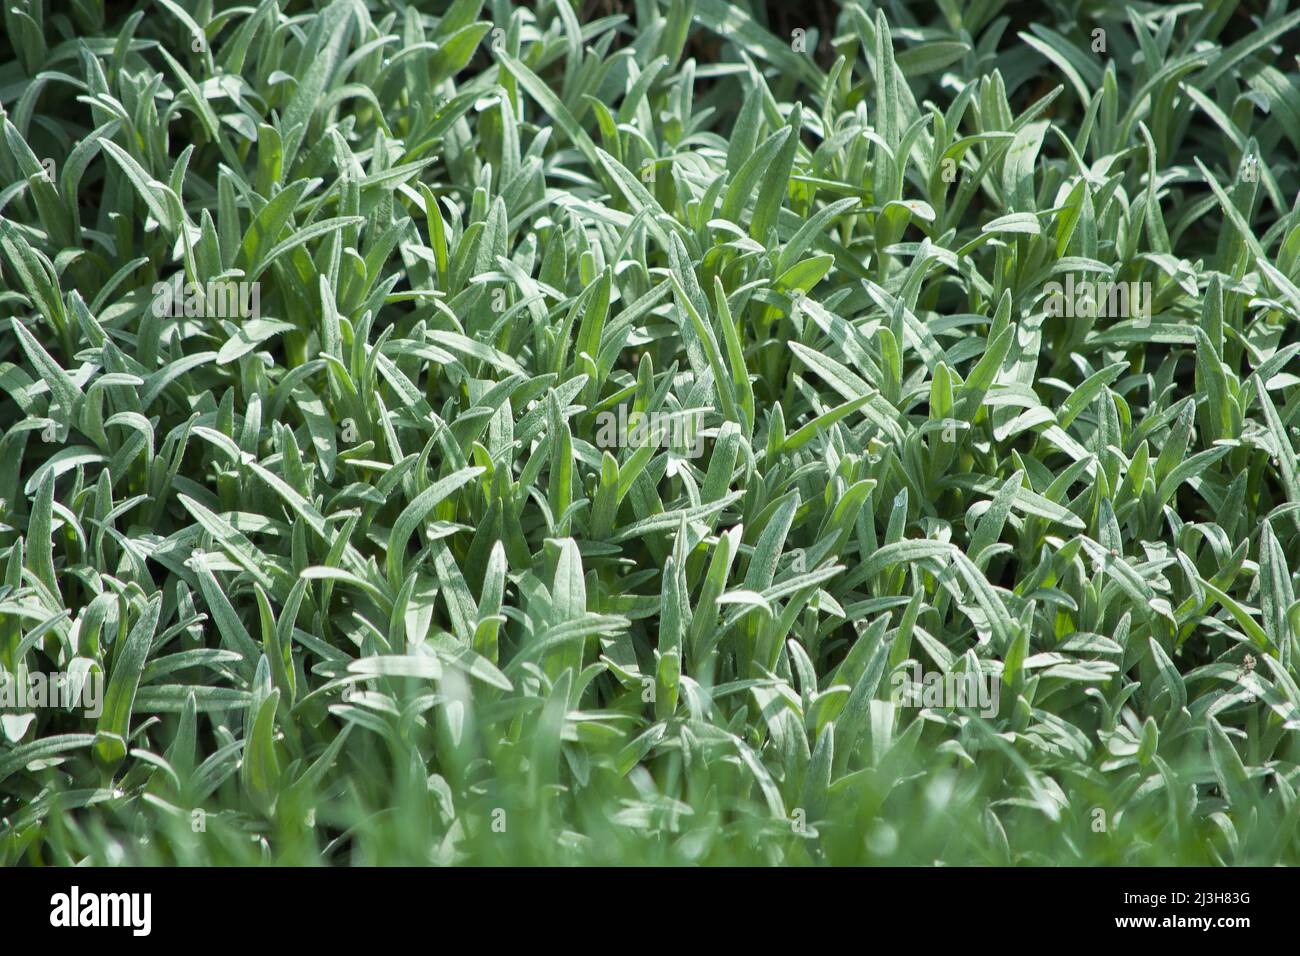 Silver gray evergreen foliage of Cerastium tomentosum also called Snow-in-summer, carpet forming groundcover for rock gardens, copy space, selected fo Stock Photo